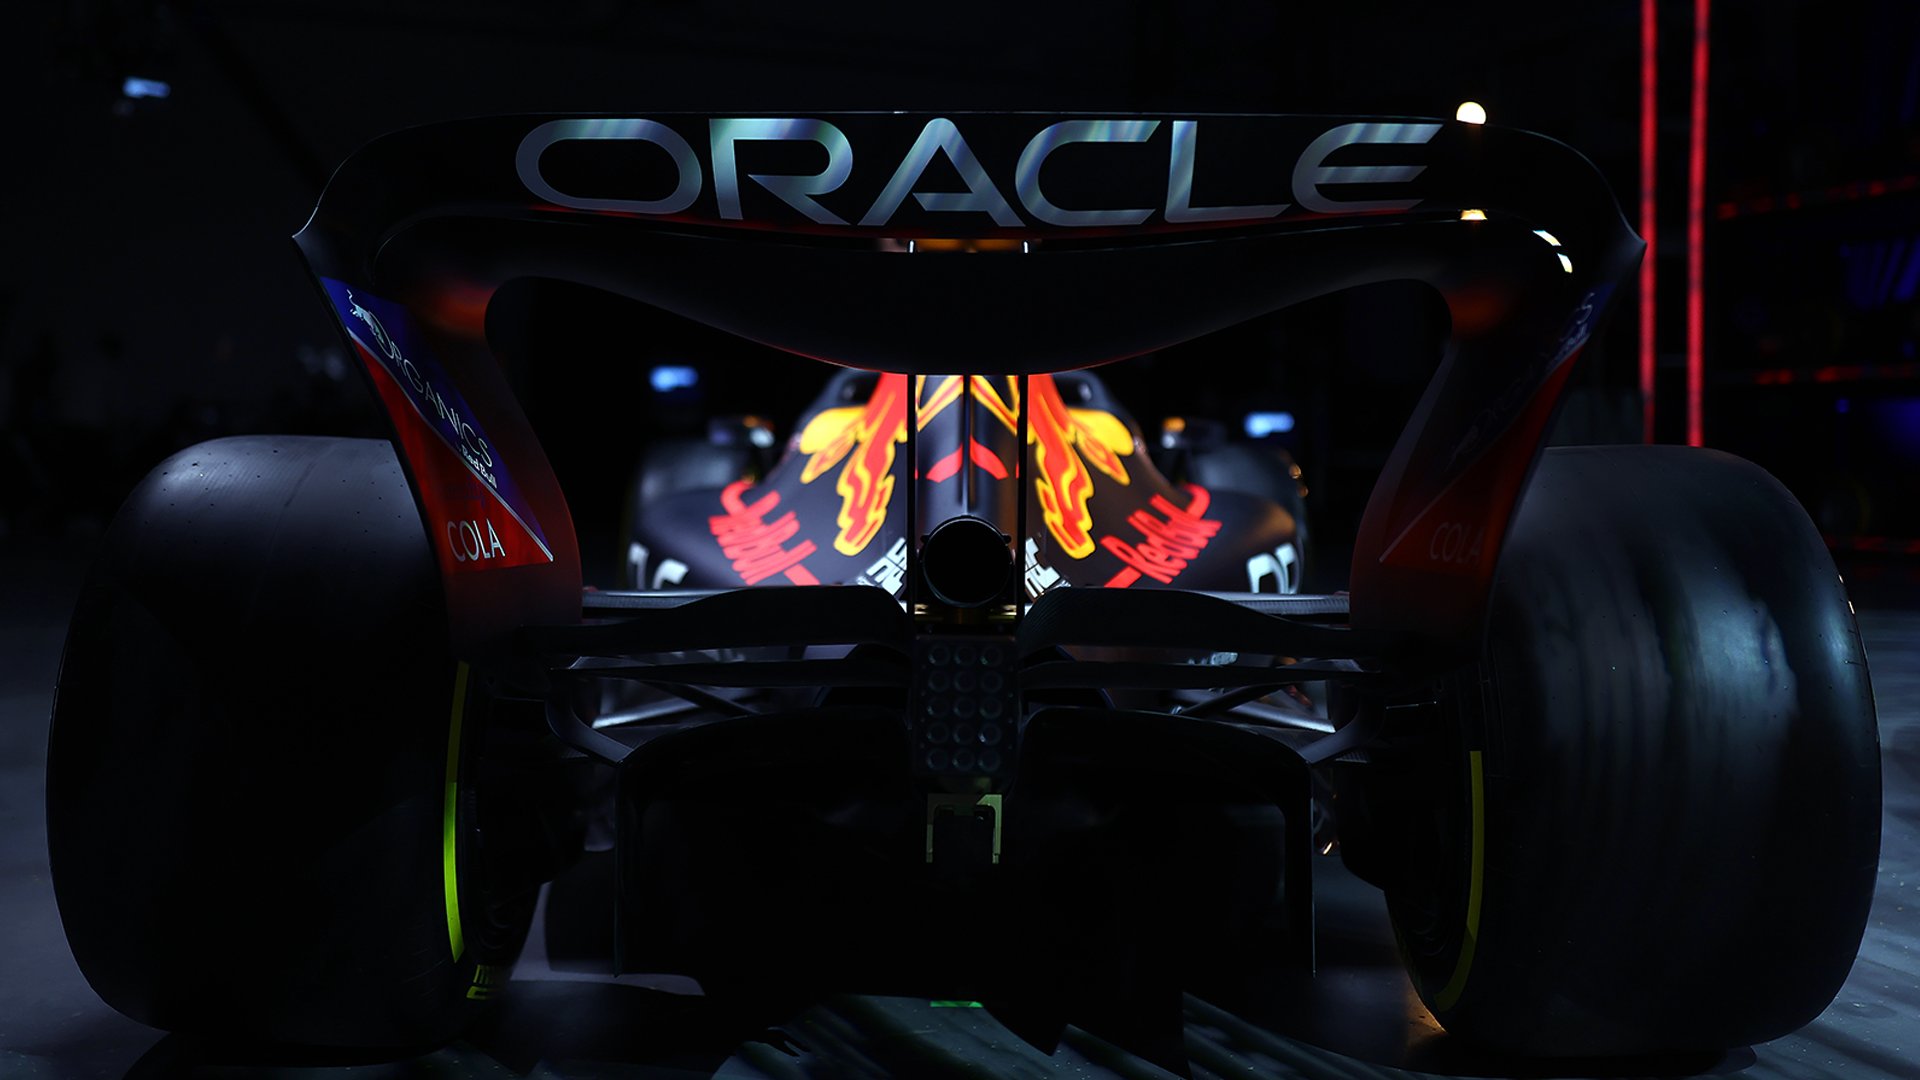 Red Bull S Oracle Title Sponsorship Deal Worth A Ed 500m